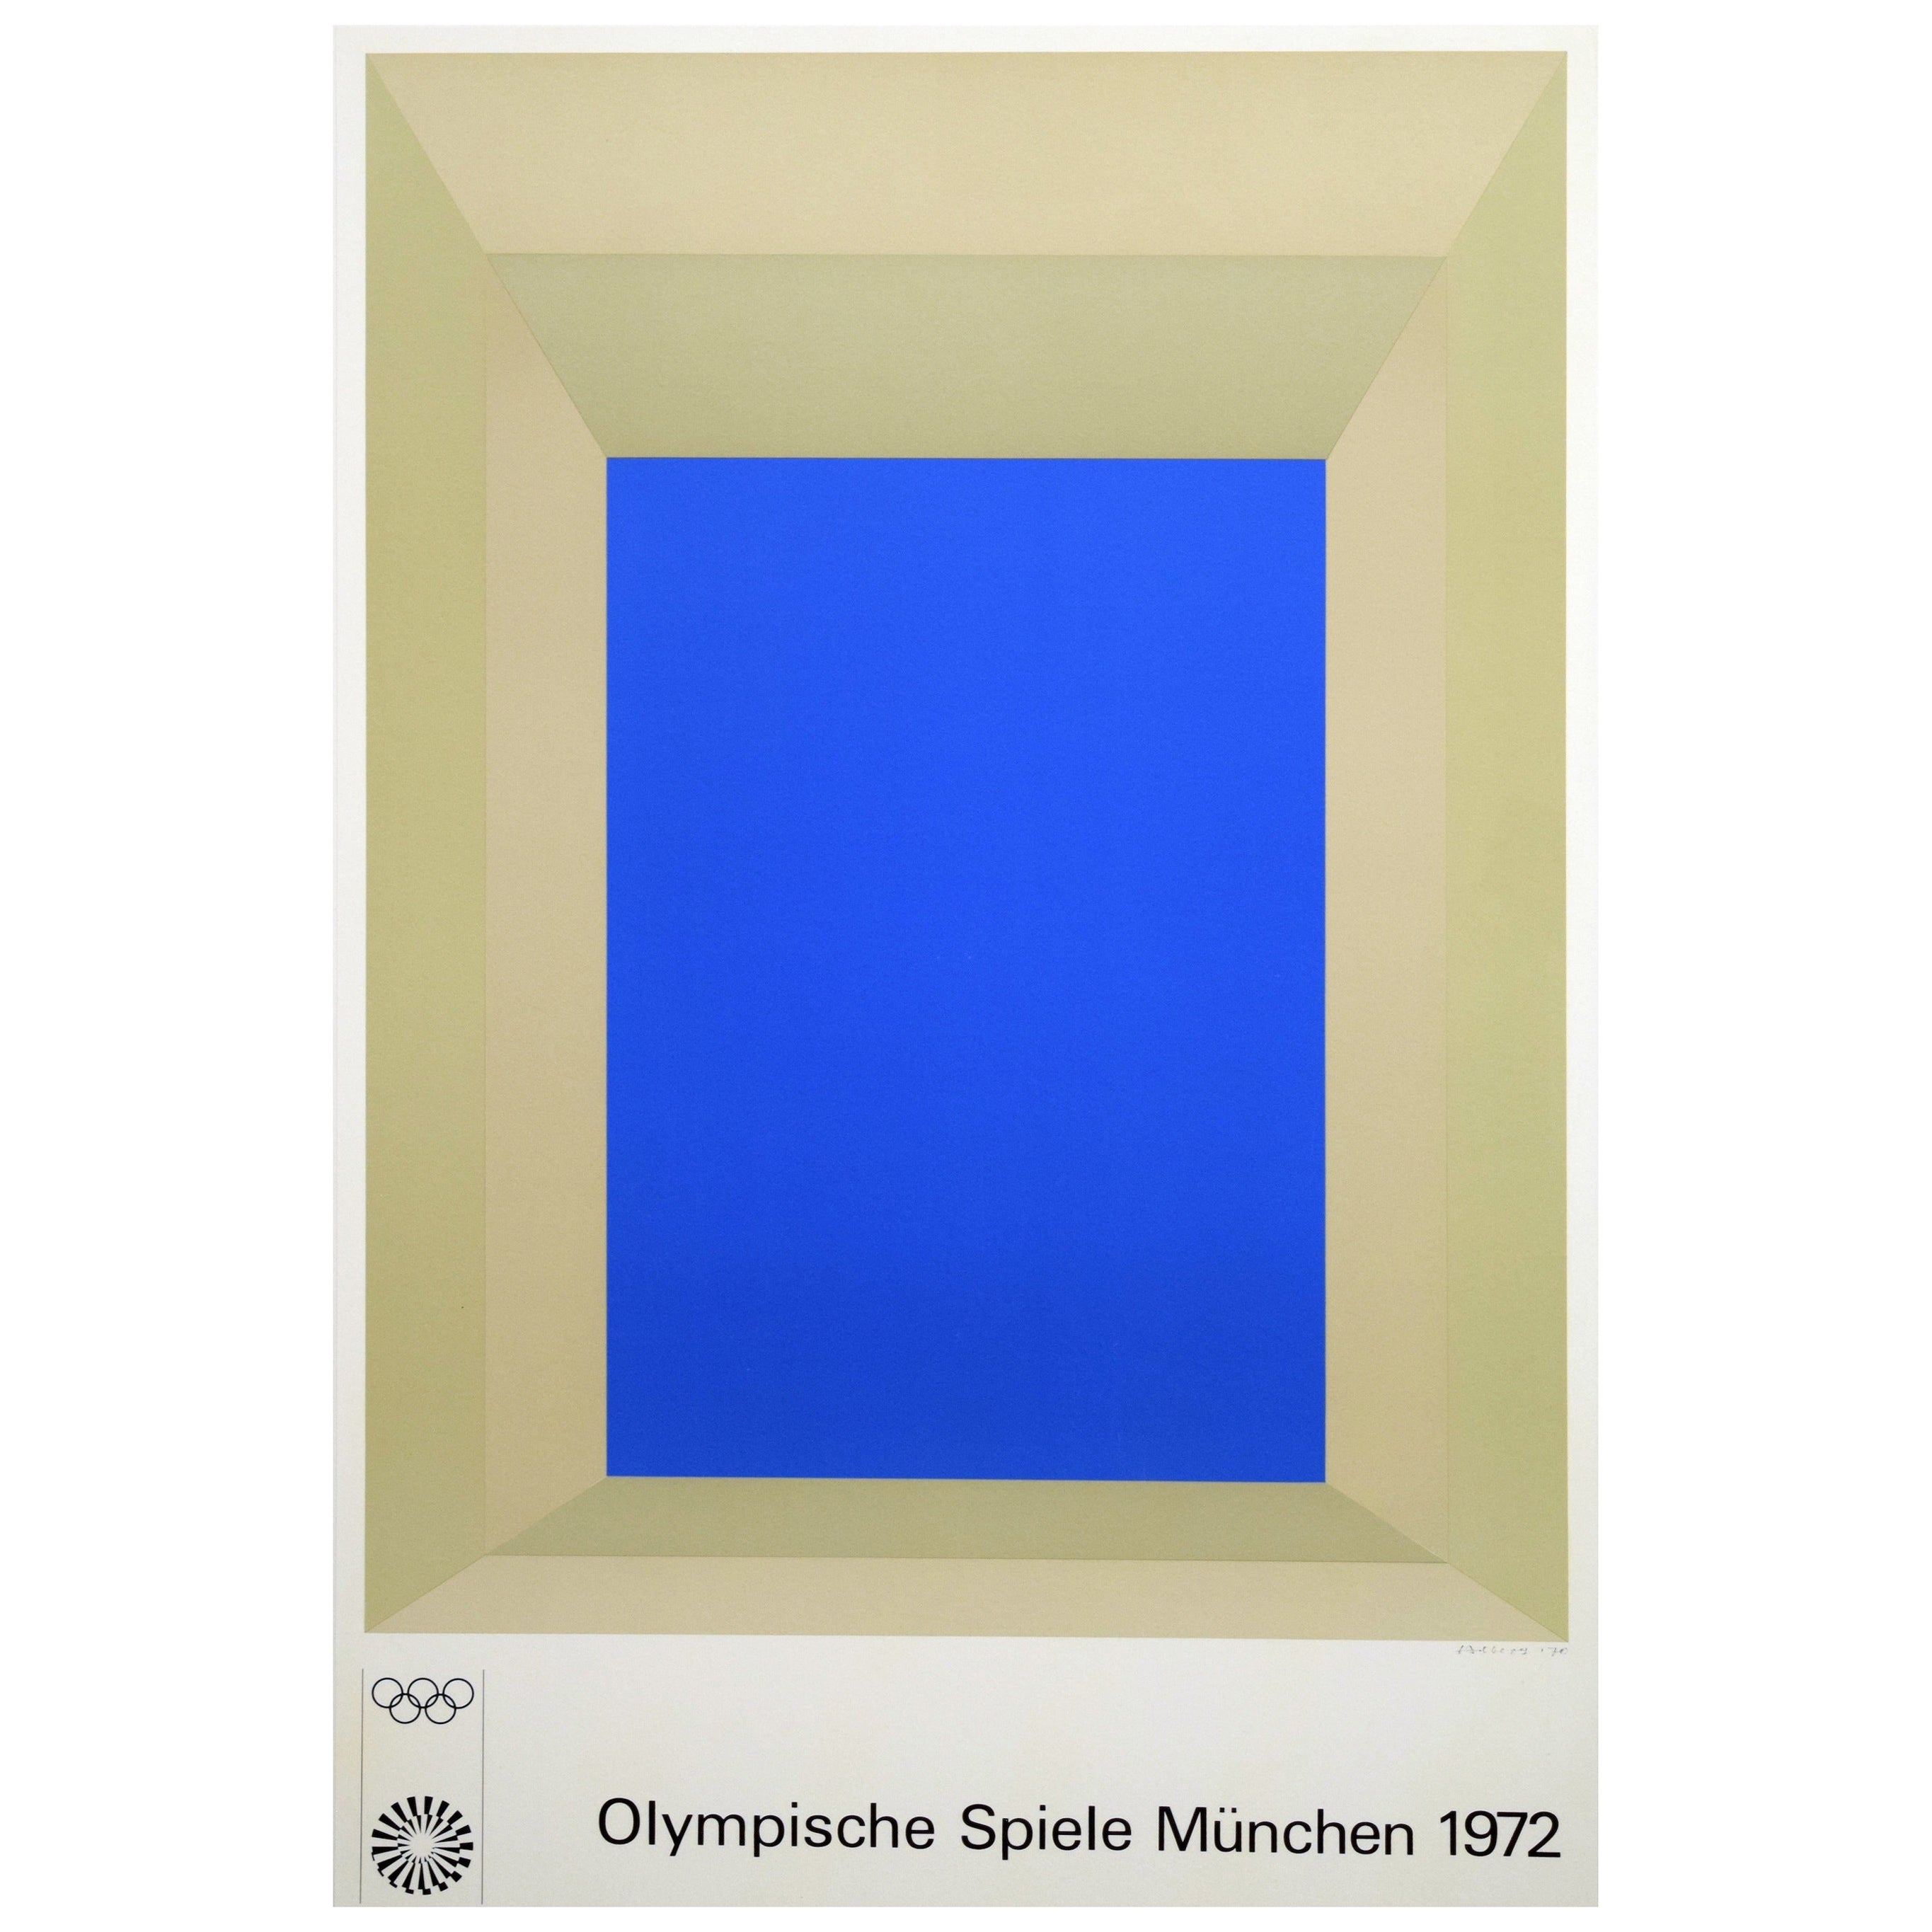 1972 Olympic Poster by Josef Albers